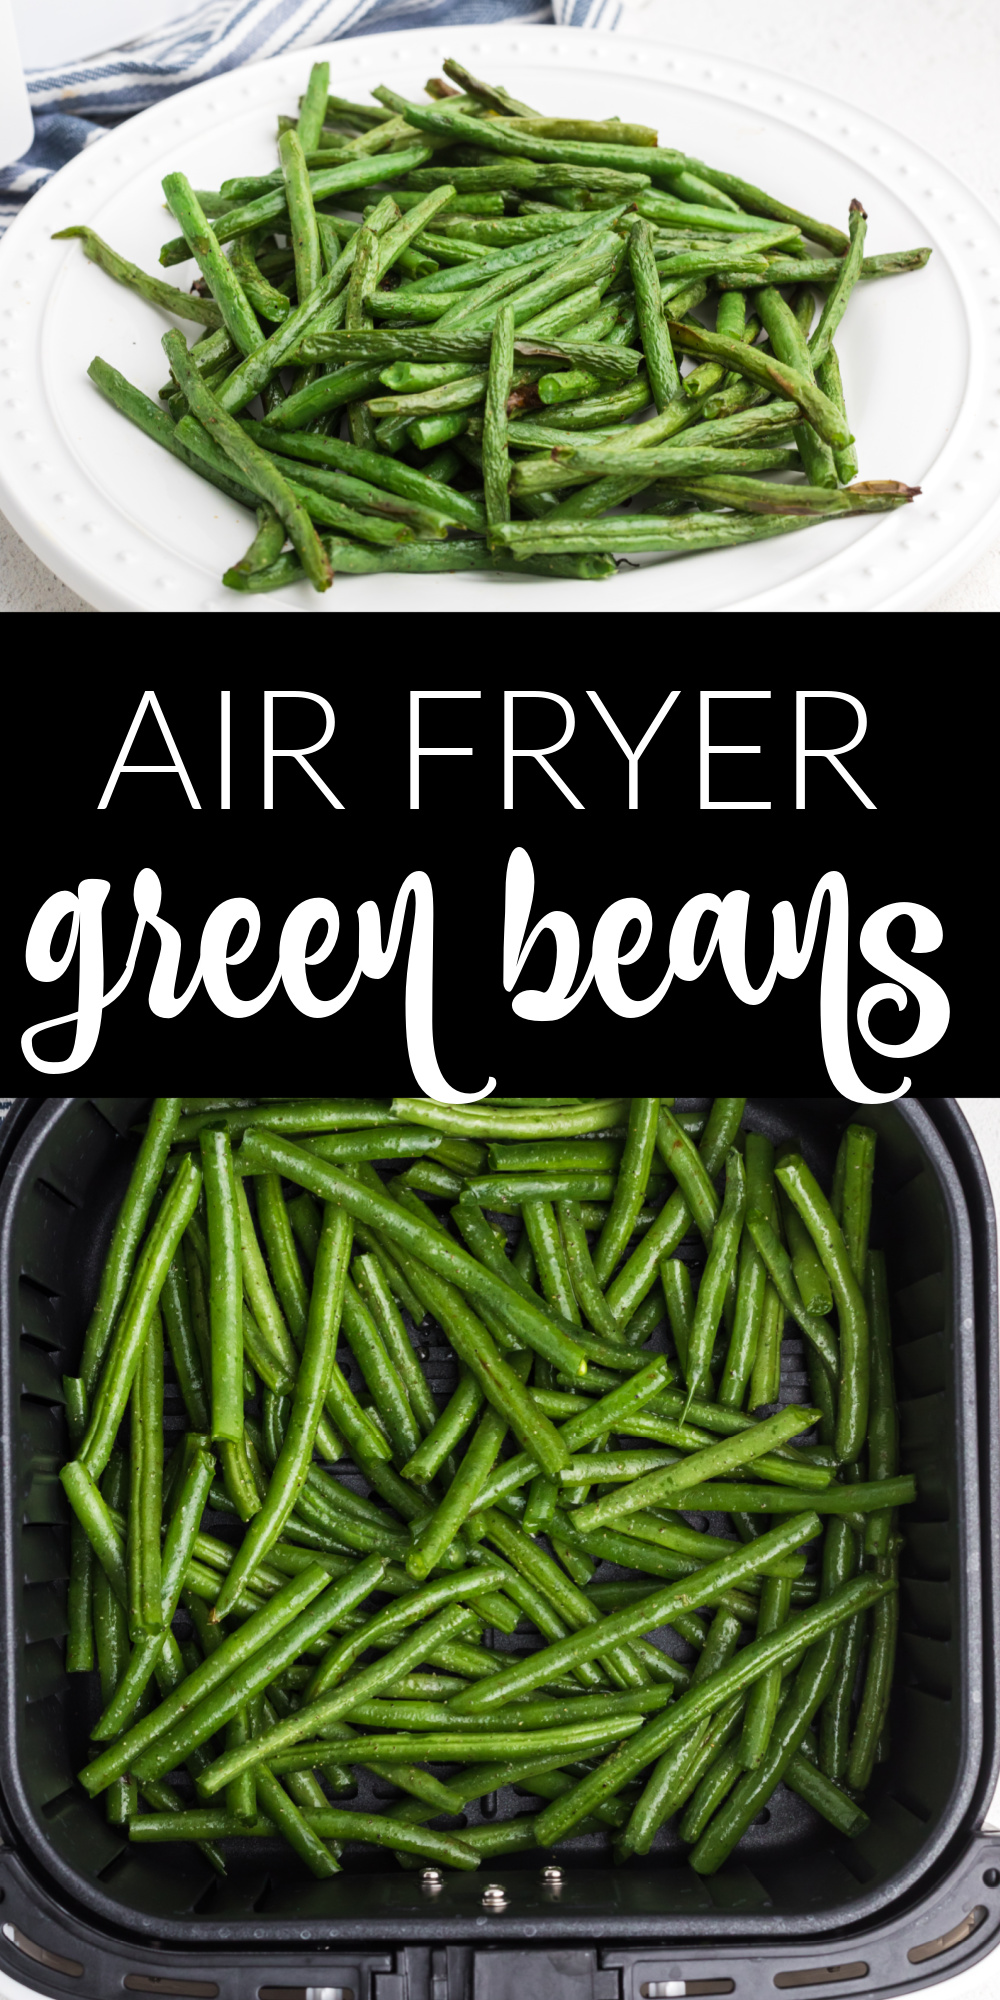 Fresh Air Fryer Green Beans - vibrant, plump green beans fresh from the farm tossed in olive oil, garlic, salt, and pepper then air fried creating a crackly exterior while maintaining a crisp juice inside resulting in an irresistible side dish or snack. These delicious air fryer green beans are ready in less than ten minutes and are sure to be a hit among kids and adults alike!